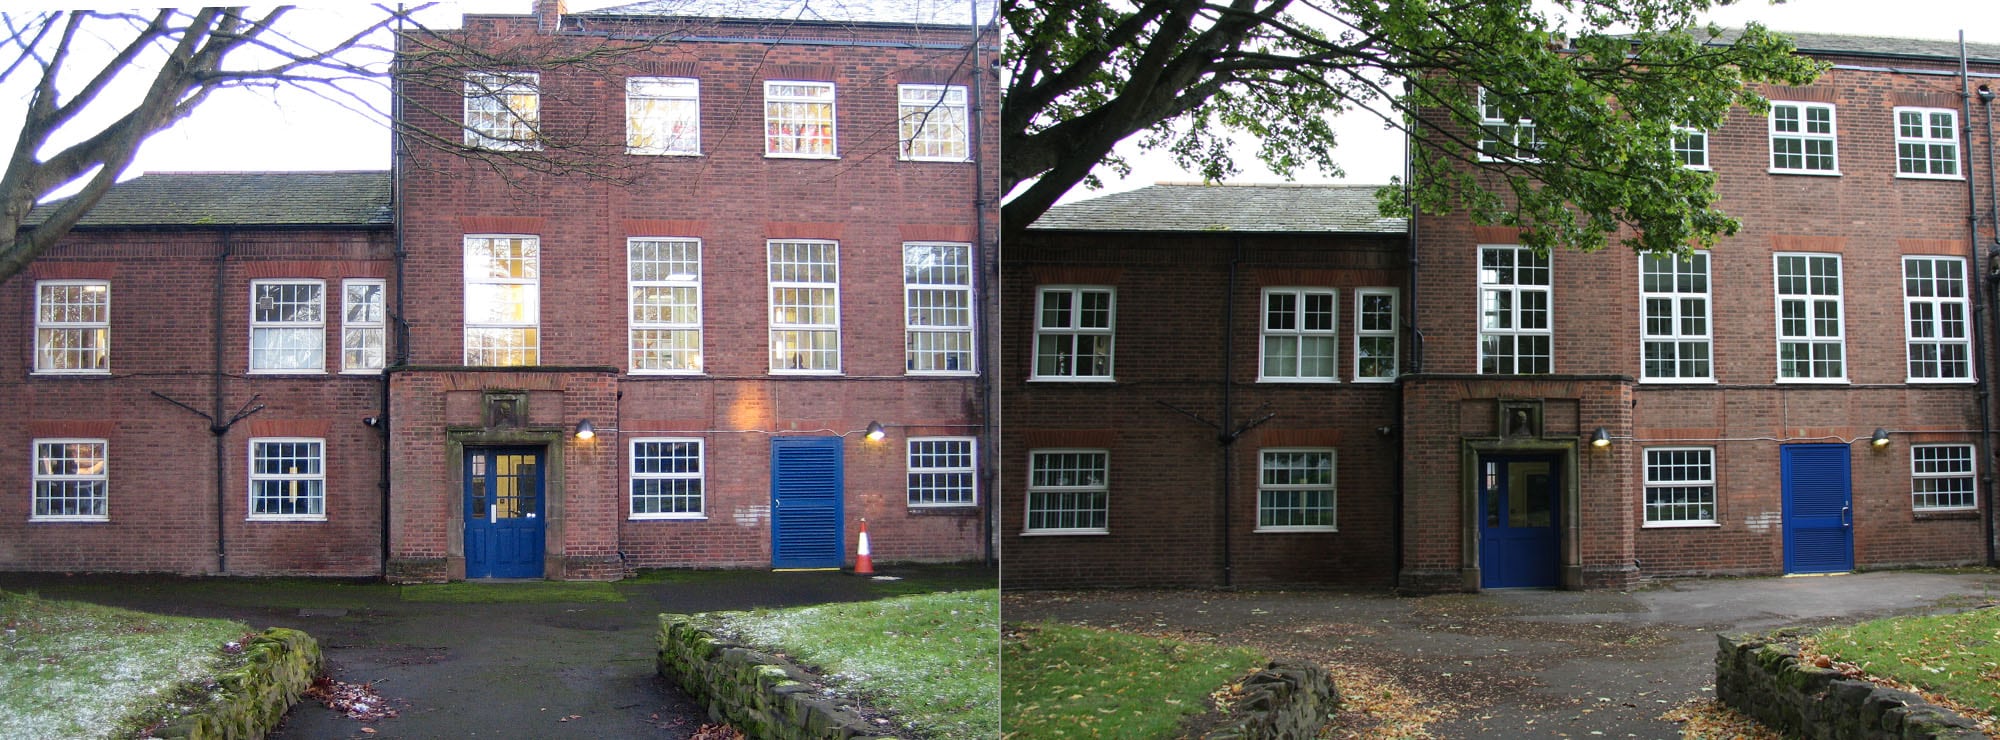 <strong>Junior School in West Midlands</strong>Replacement UPVC windows and aluminium doors to front elevation.